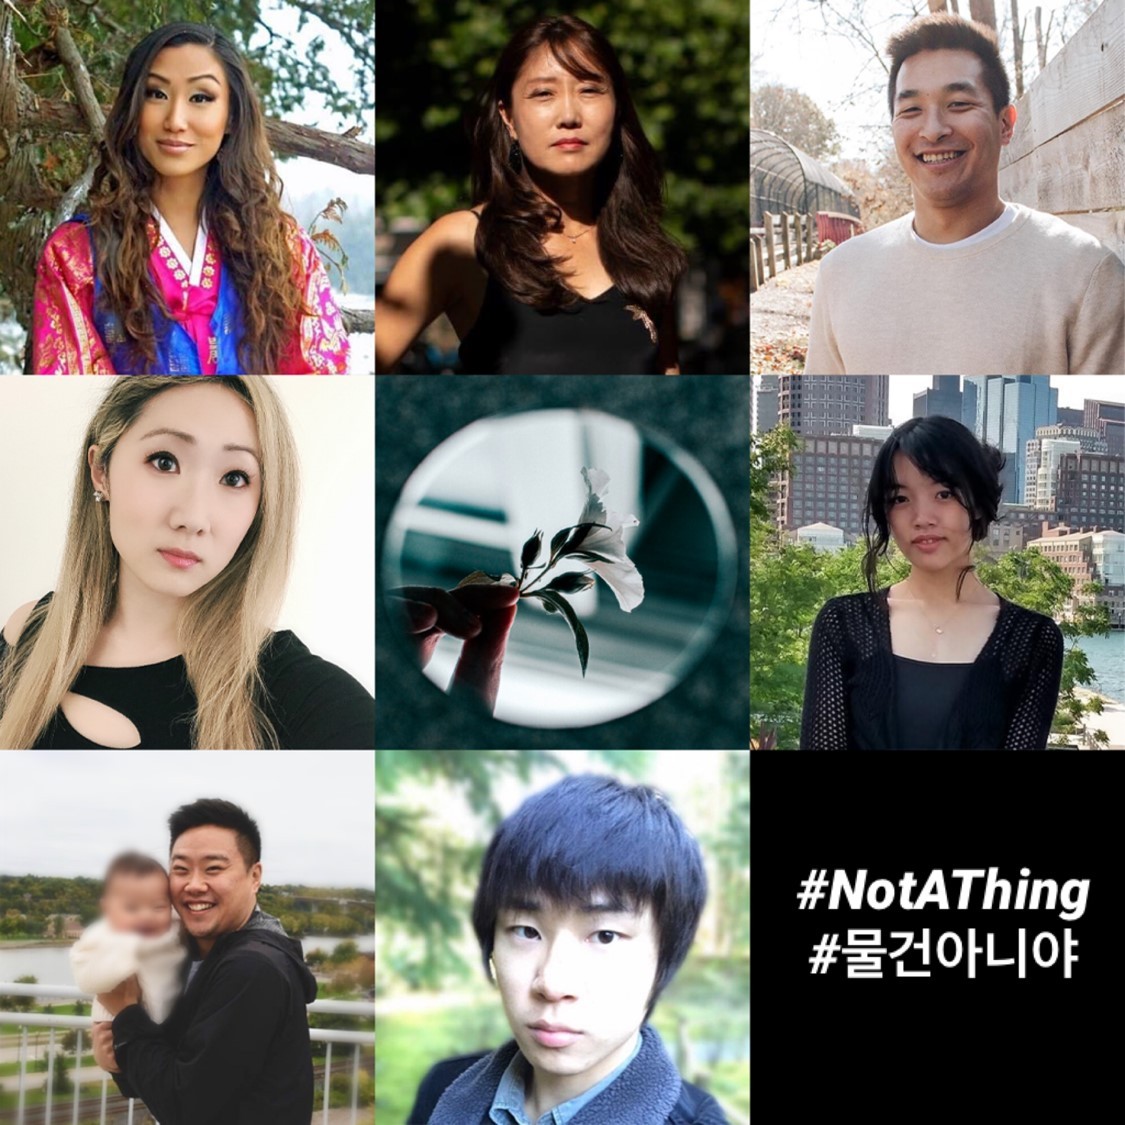 A group of South Korean adoptees have launched a social media movement with the hashtags #NotAThing. The graphic was made by Valerie Reilly. Petition: Kara Bos, Kevin Omans, Liat Shapiro, Cam Lee, Allison Park, Brenna McHugh and Patrick Armstrong